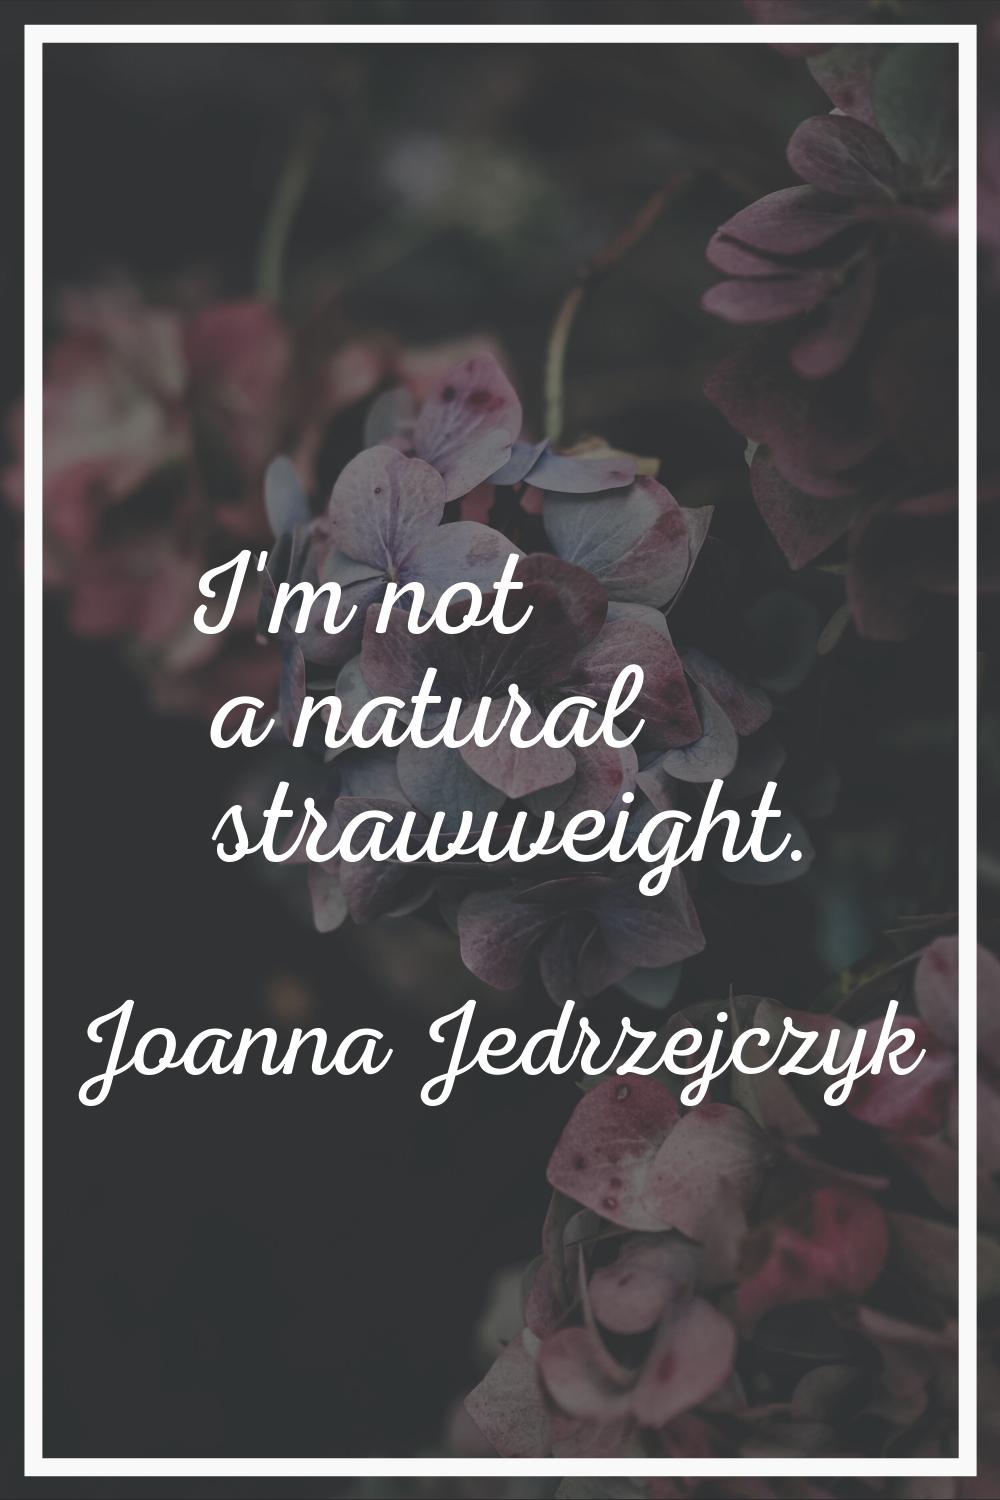 I'm not a natural strawweight.